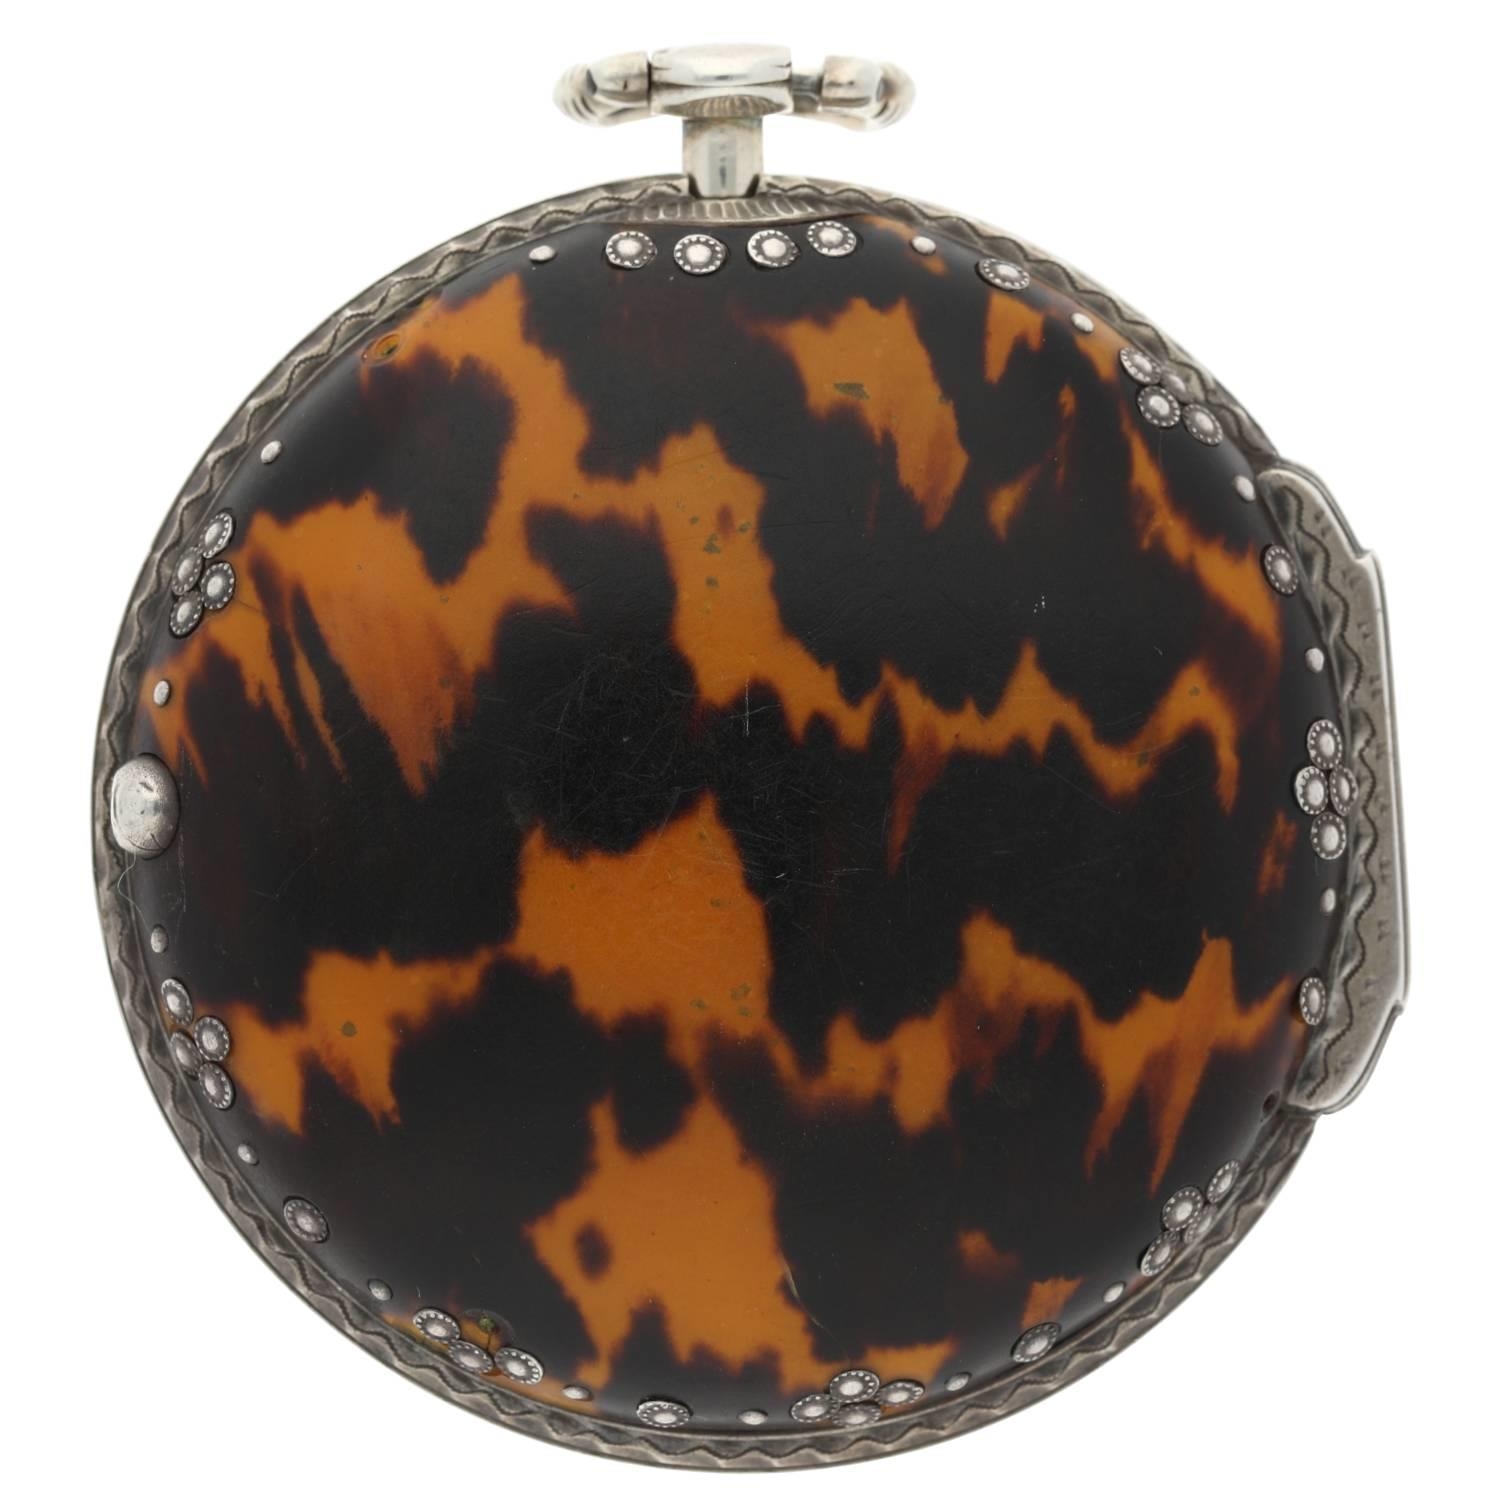 Ralph Gout, London - early 19th century silver and tortoiseshell triple cased verge pocket watch - Image 8 of 13